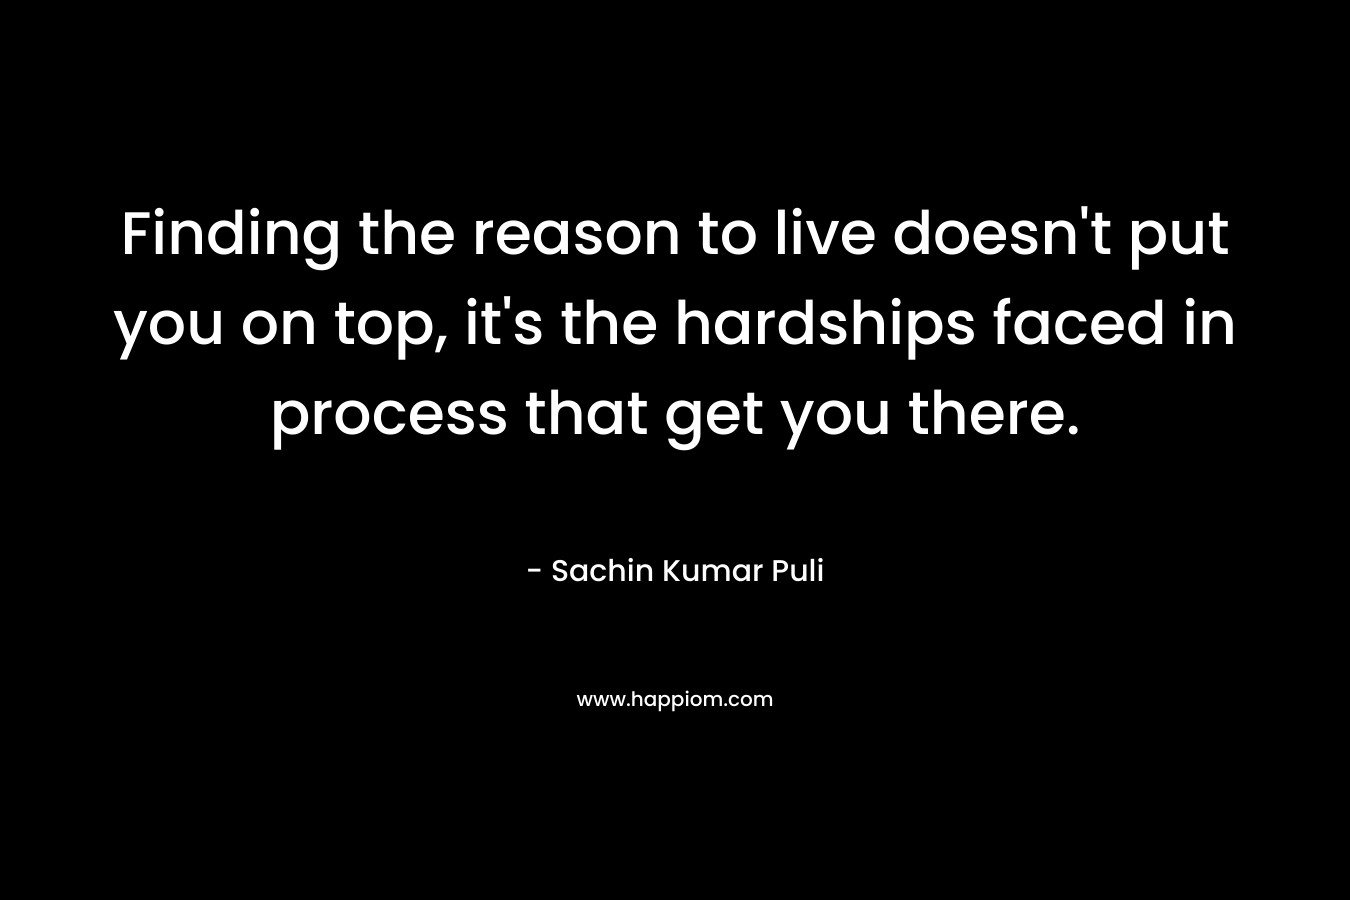 Finding the reason to live doesn’t put you on top, it’s the hardships faced in process that get you there. – Sachin Kumar Puli